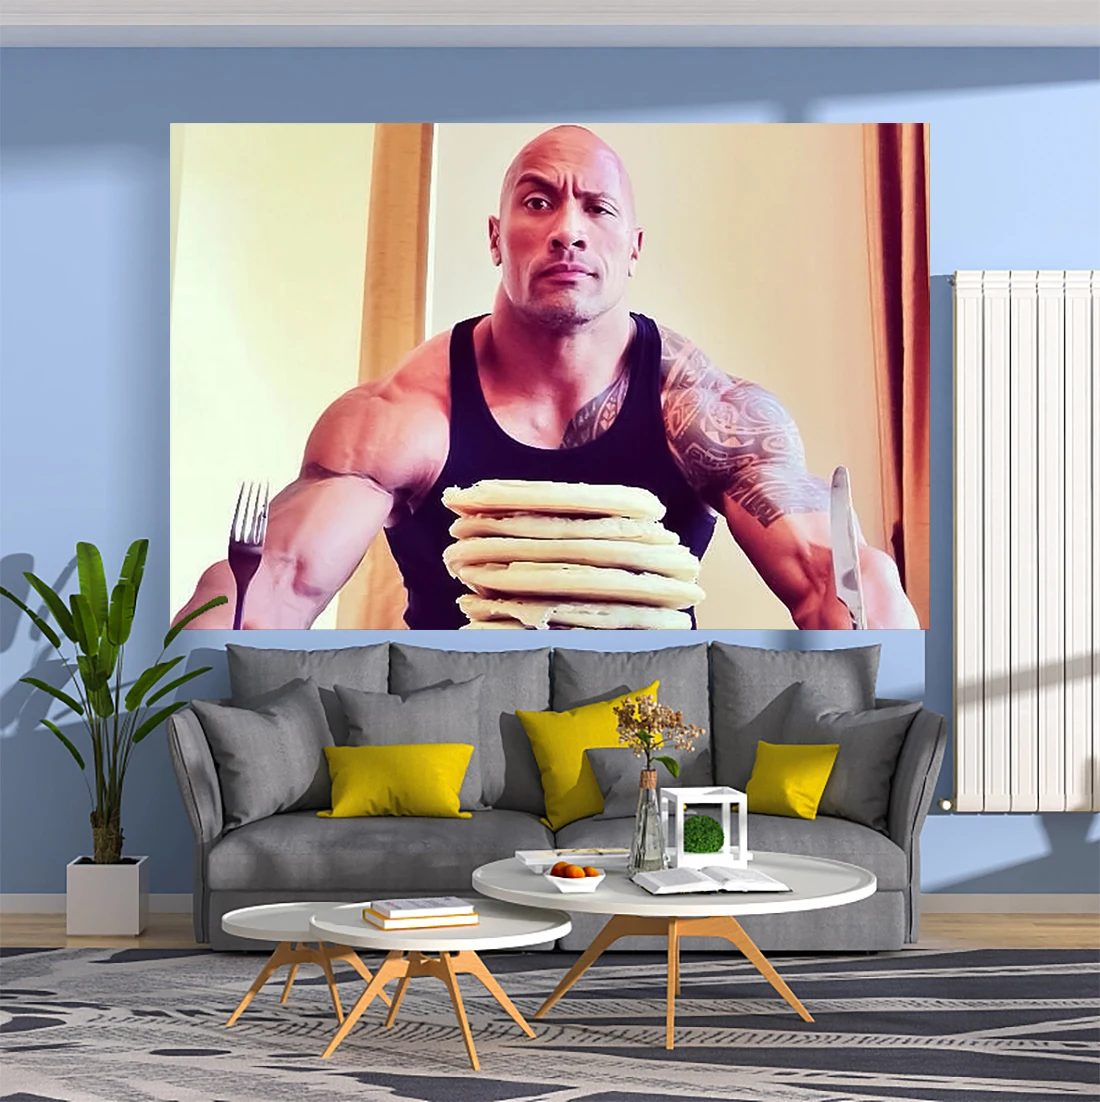 Dwayne Johnson Tapestry Movie Star Funny Meme Printed Wall Hanging Carpets Bedroom Or Home For Decoration